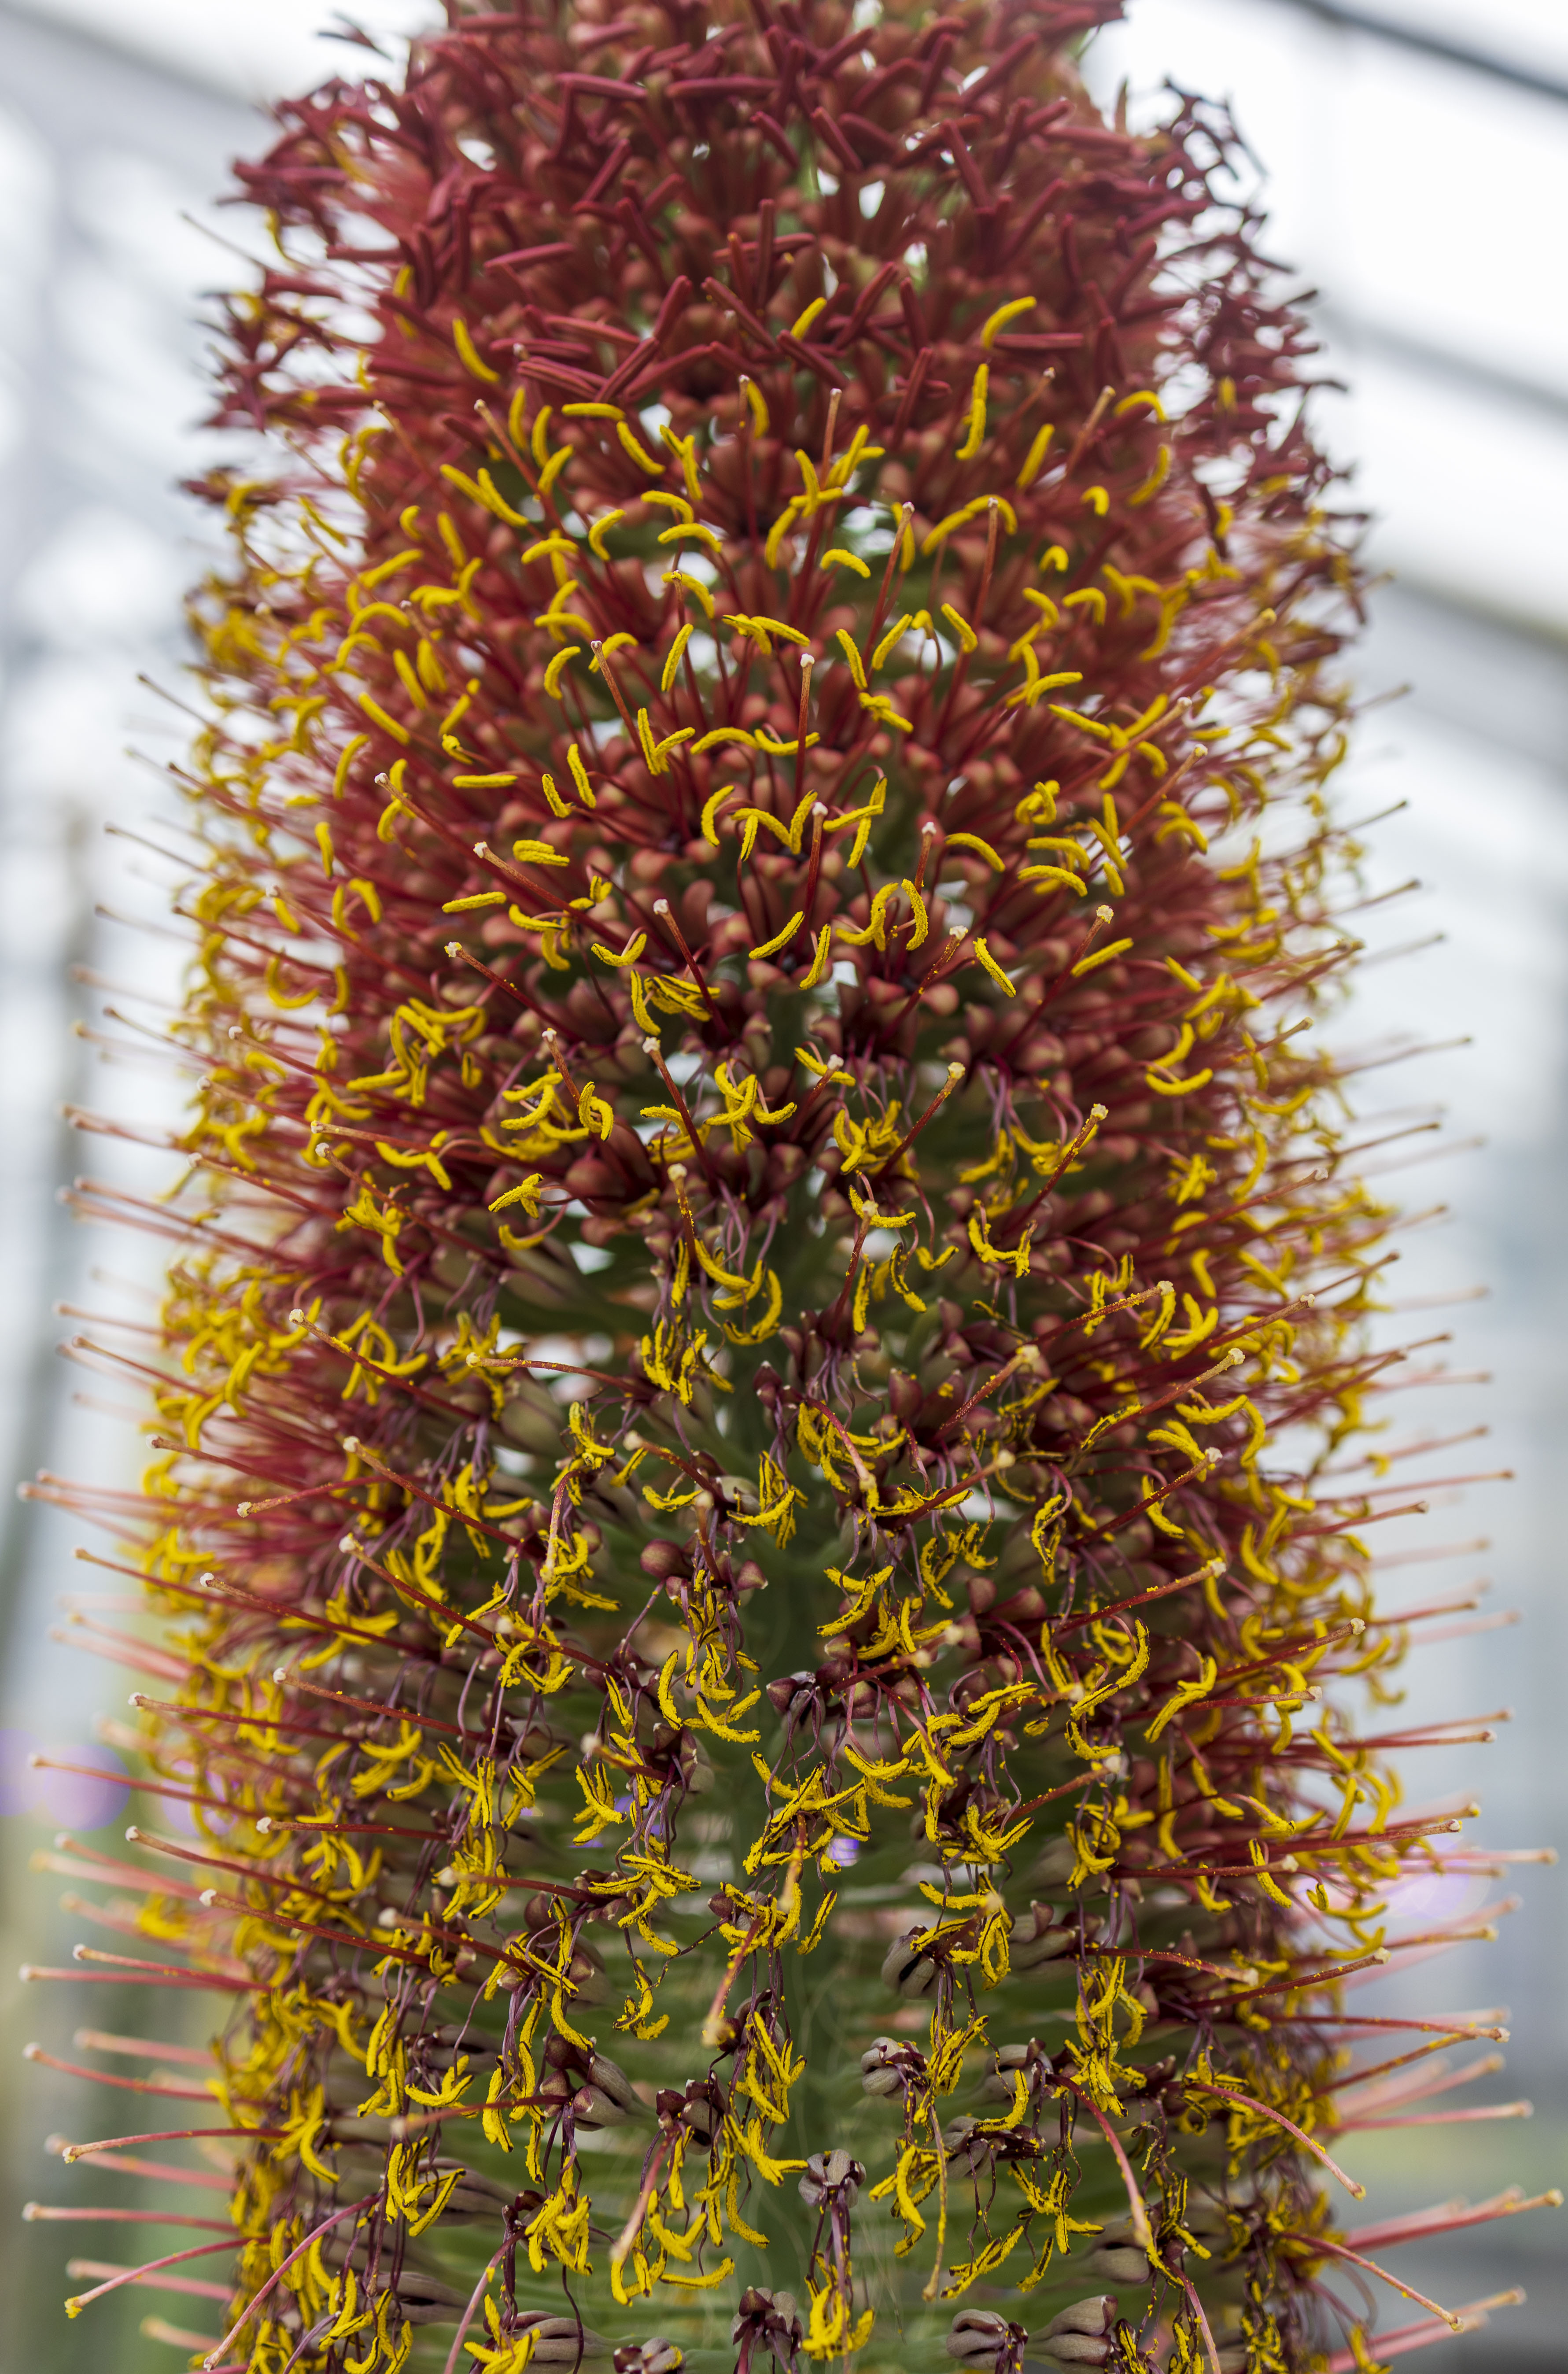 Critically Endangered Agave pelona Blooms in Garden Greenhouses